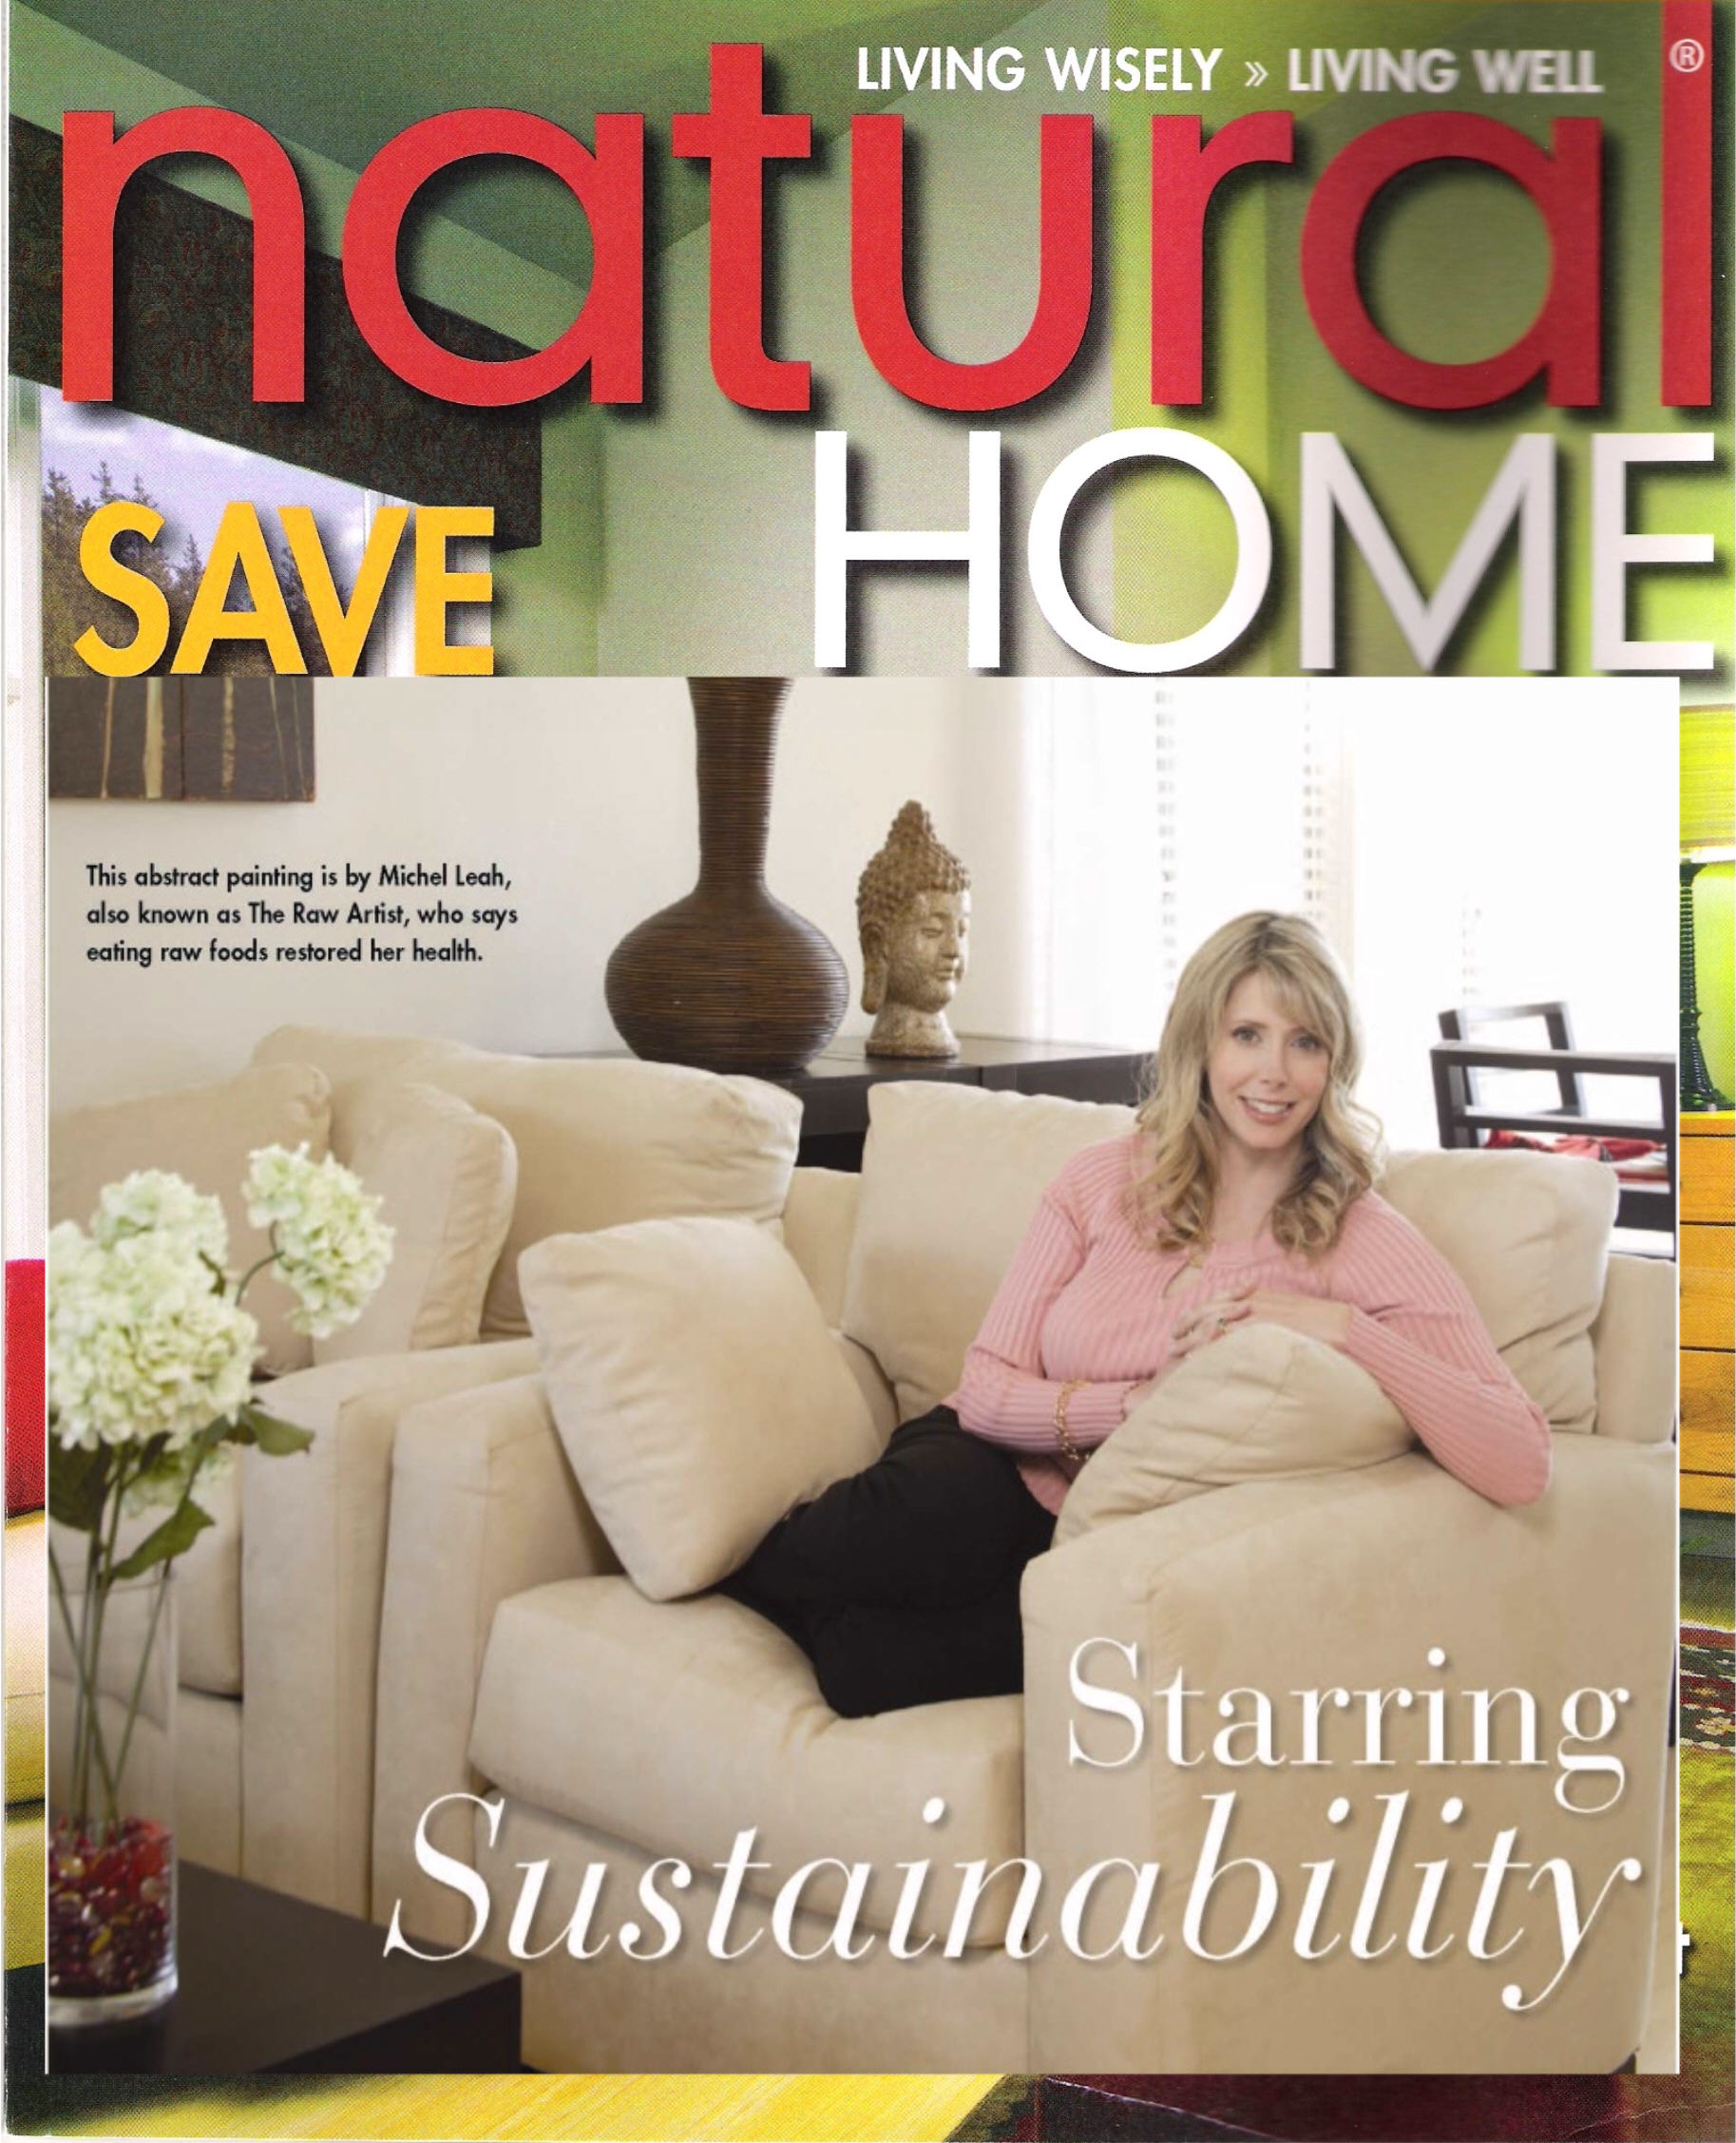 Alive & Well TV Host Michelle Harris in Natural Home Magazine - Be Green!